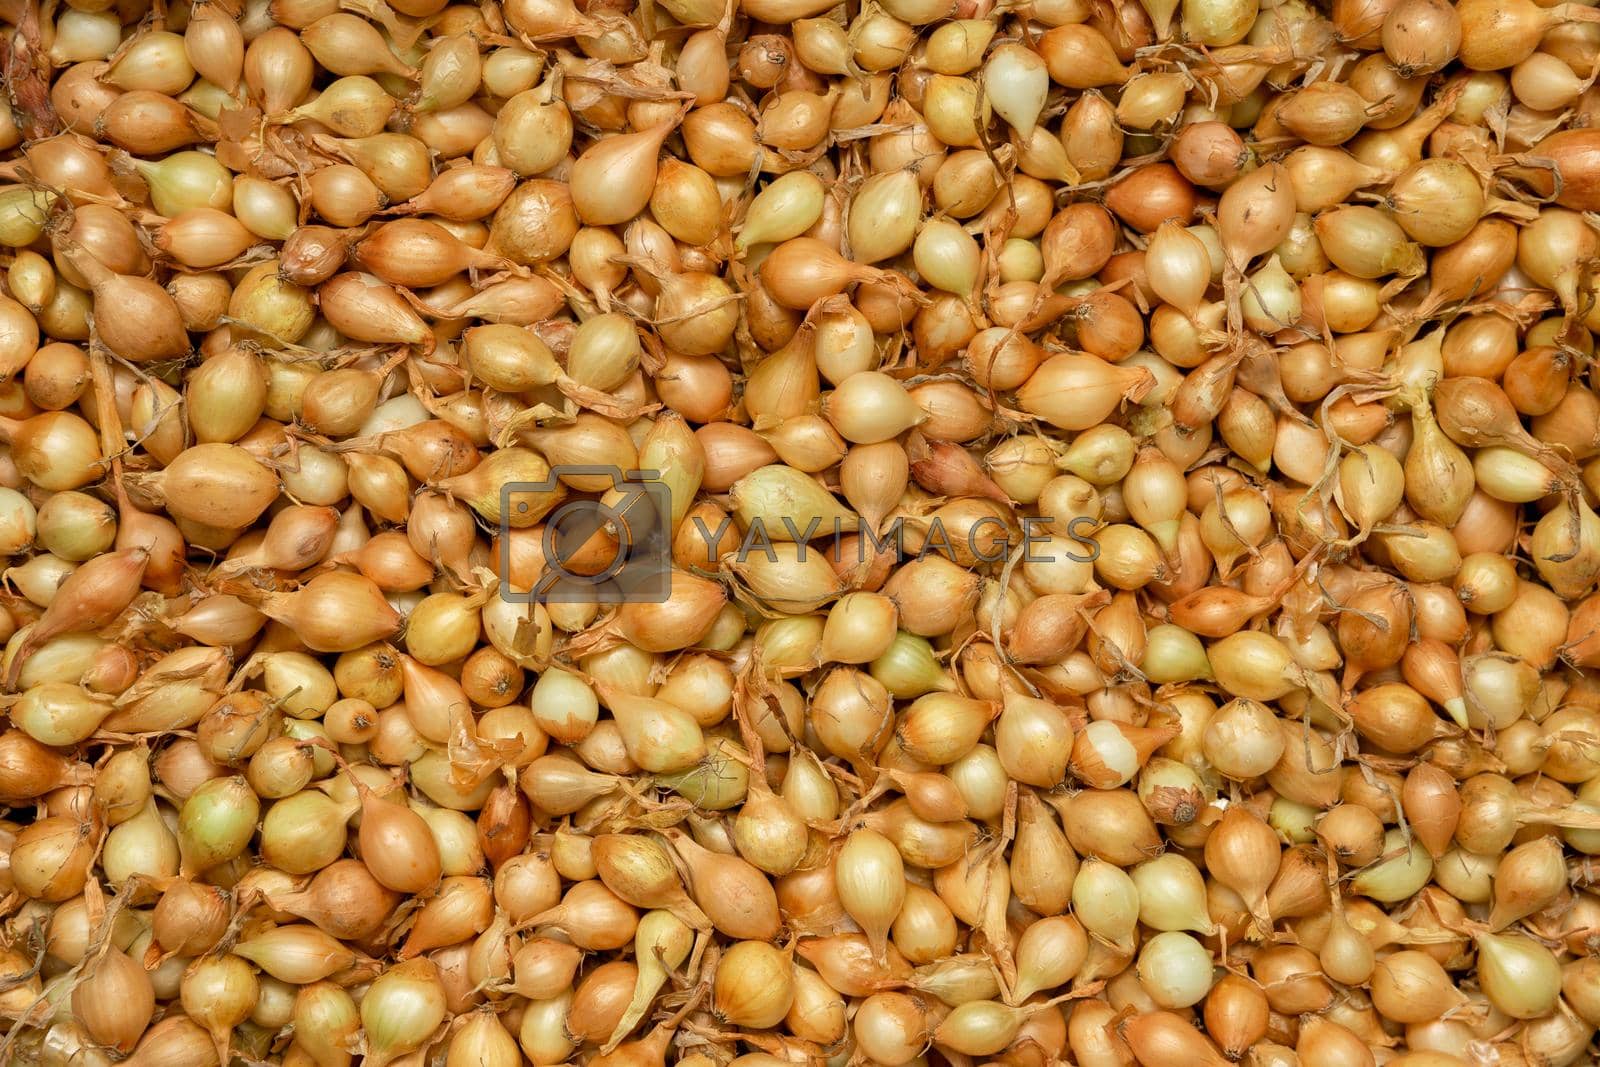 Royalty free image of Background of yellow onion sowing close-up. by BY-_-BY